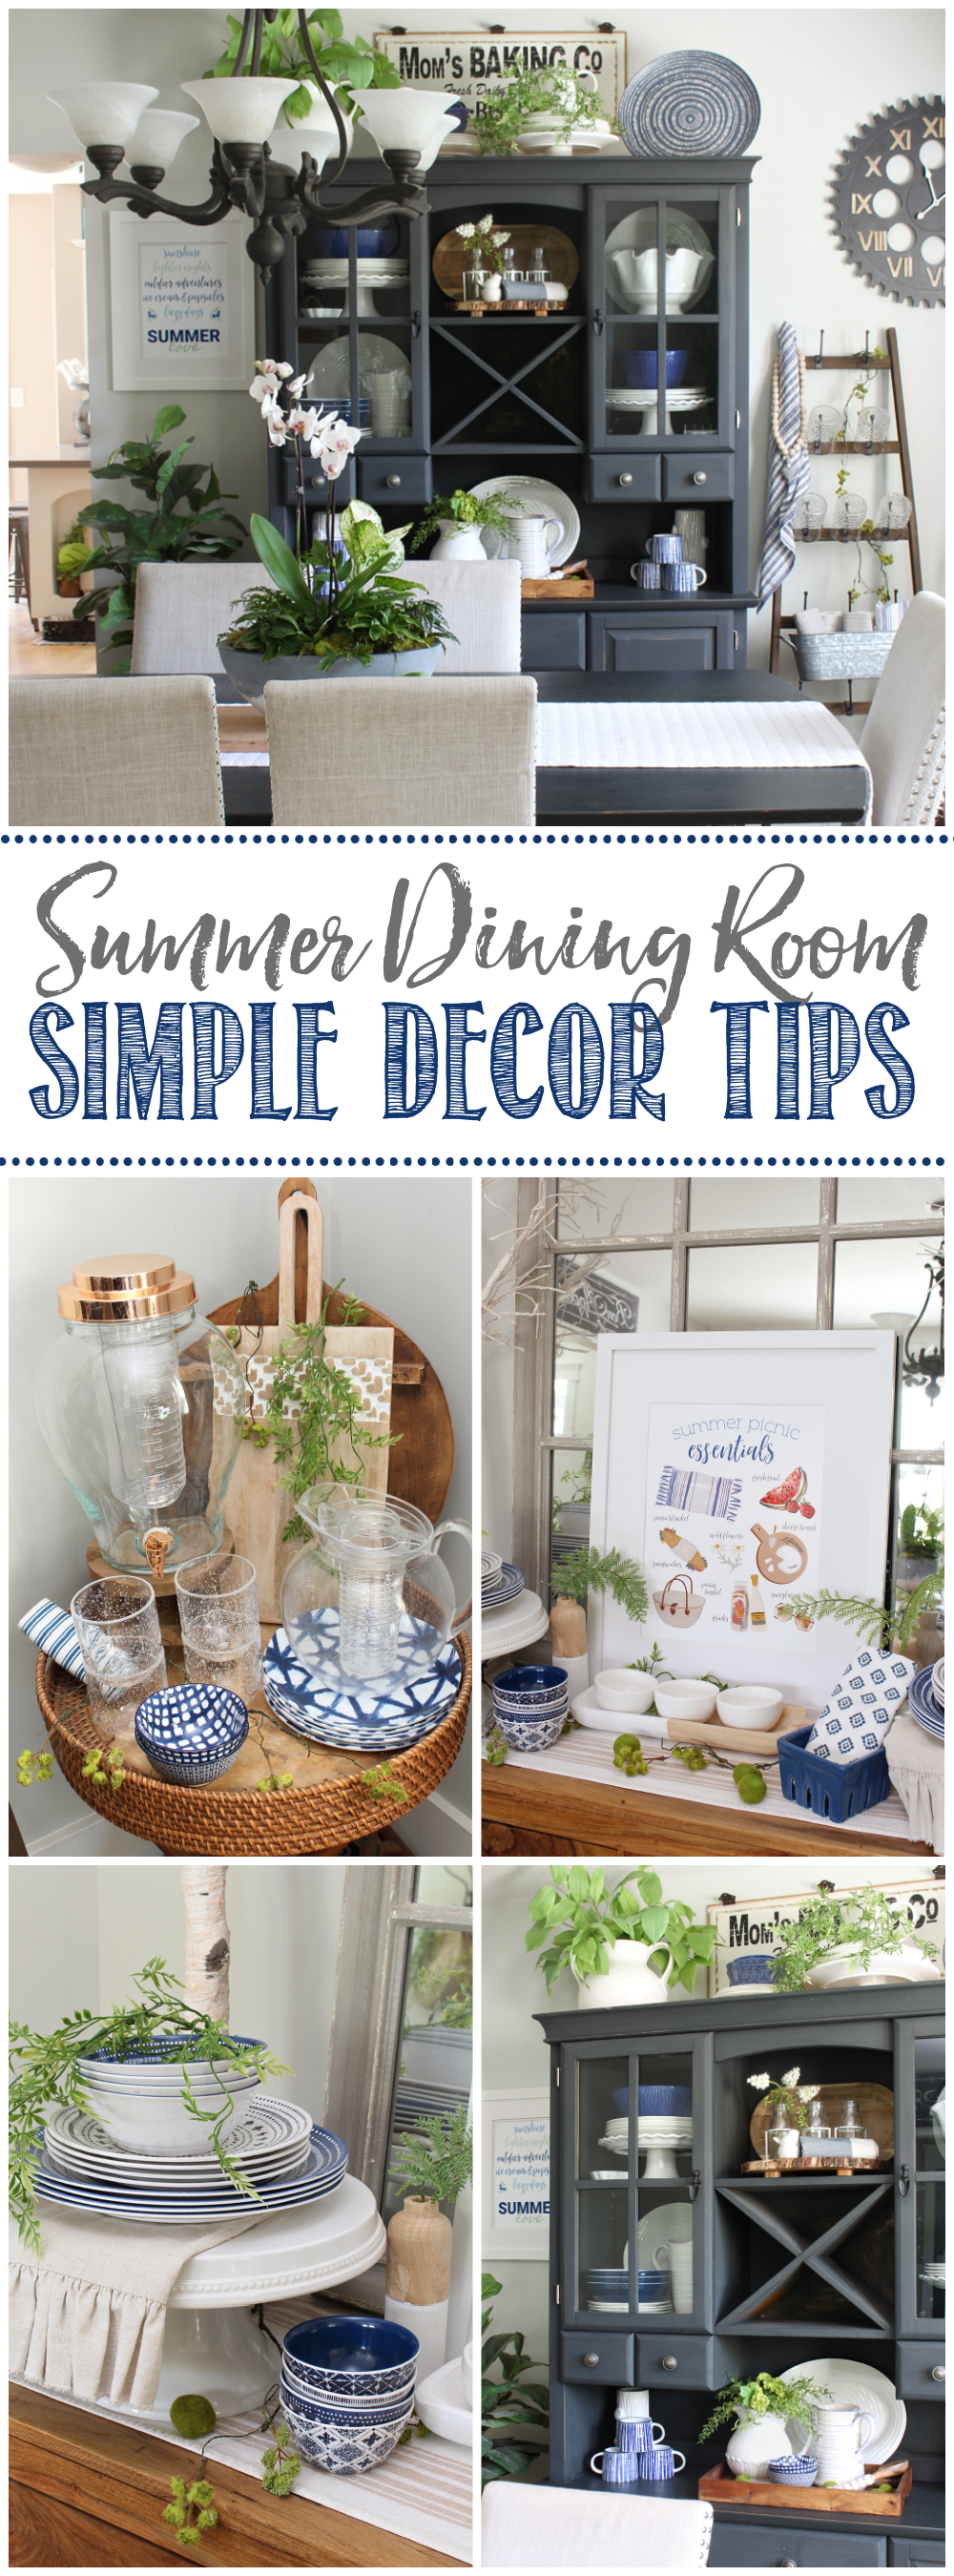 Collage of summer dining room decor ideas.